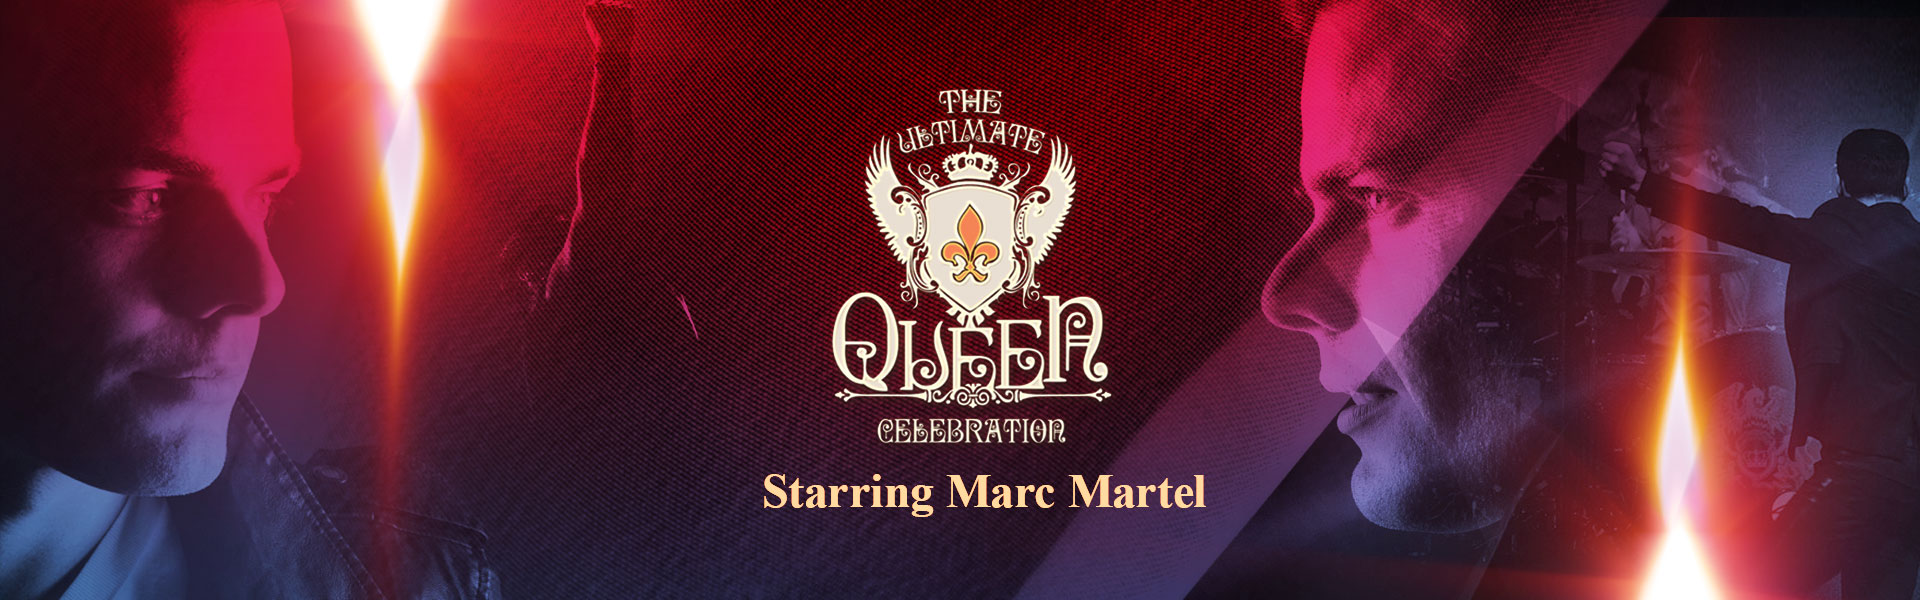 Picture for The Ultimate Queen Celebration - Starring Marc Martel